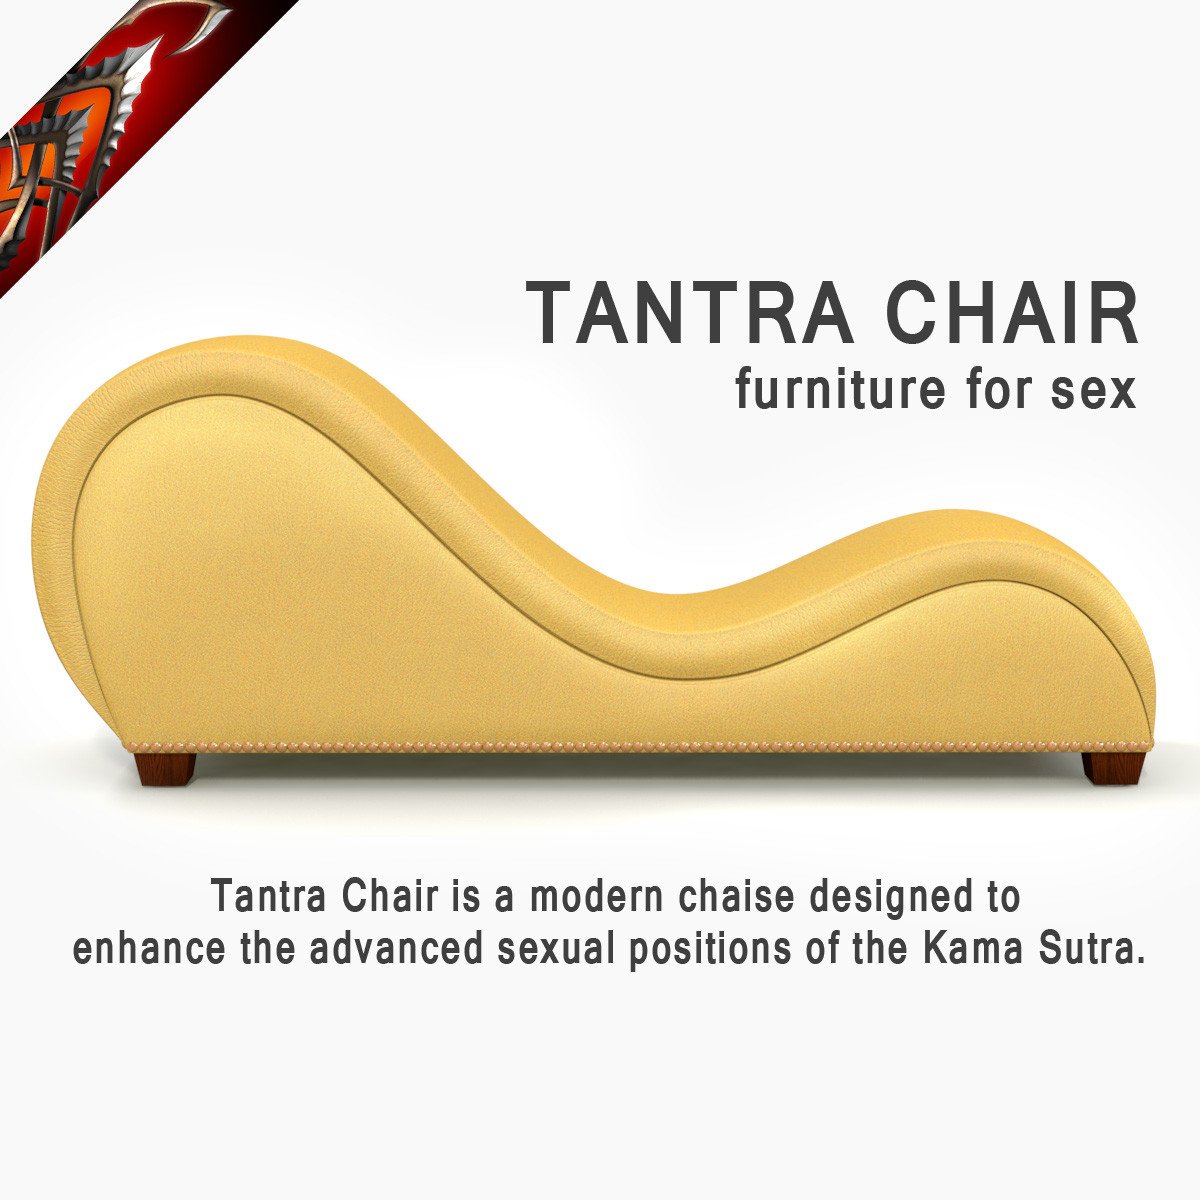 debbie winsett recommends Tantric Chair Videos